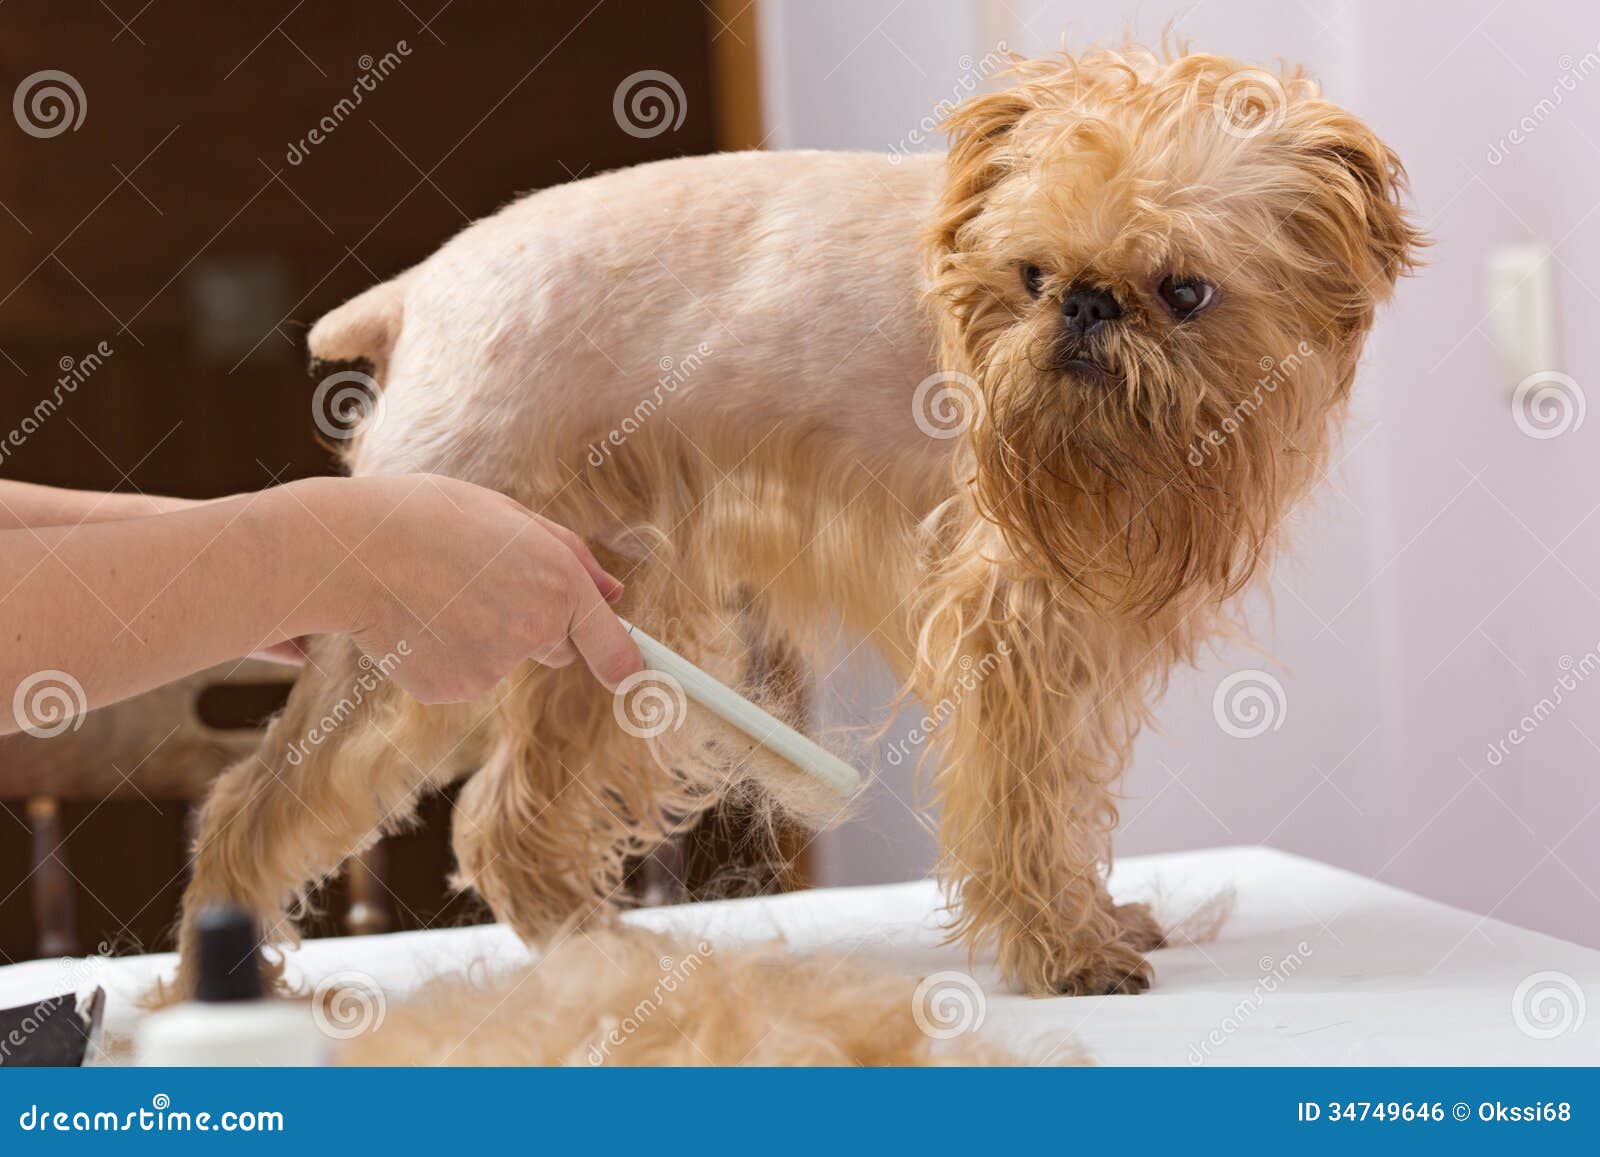 Dog grooming stock photo. Image of salon, occupation - 34749646